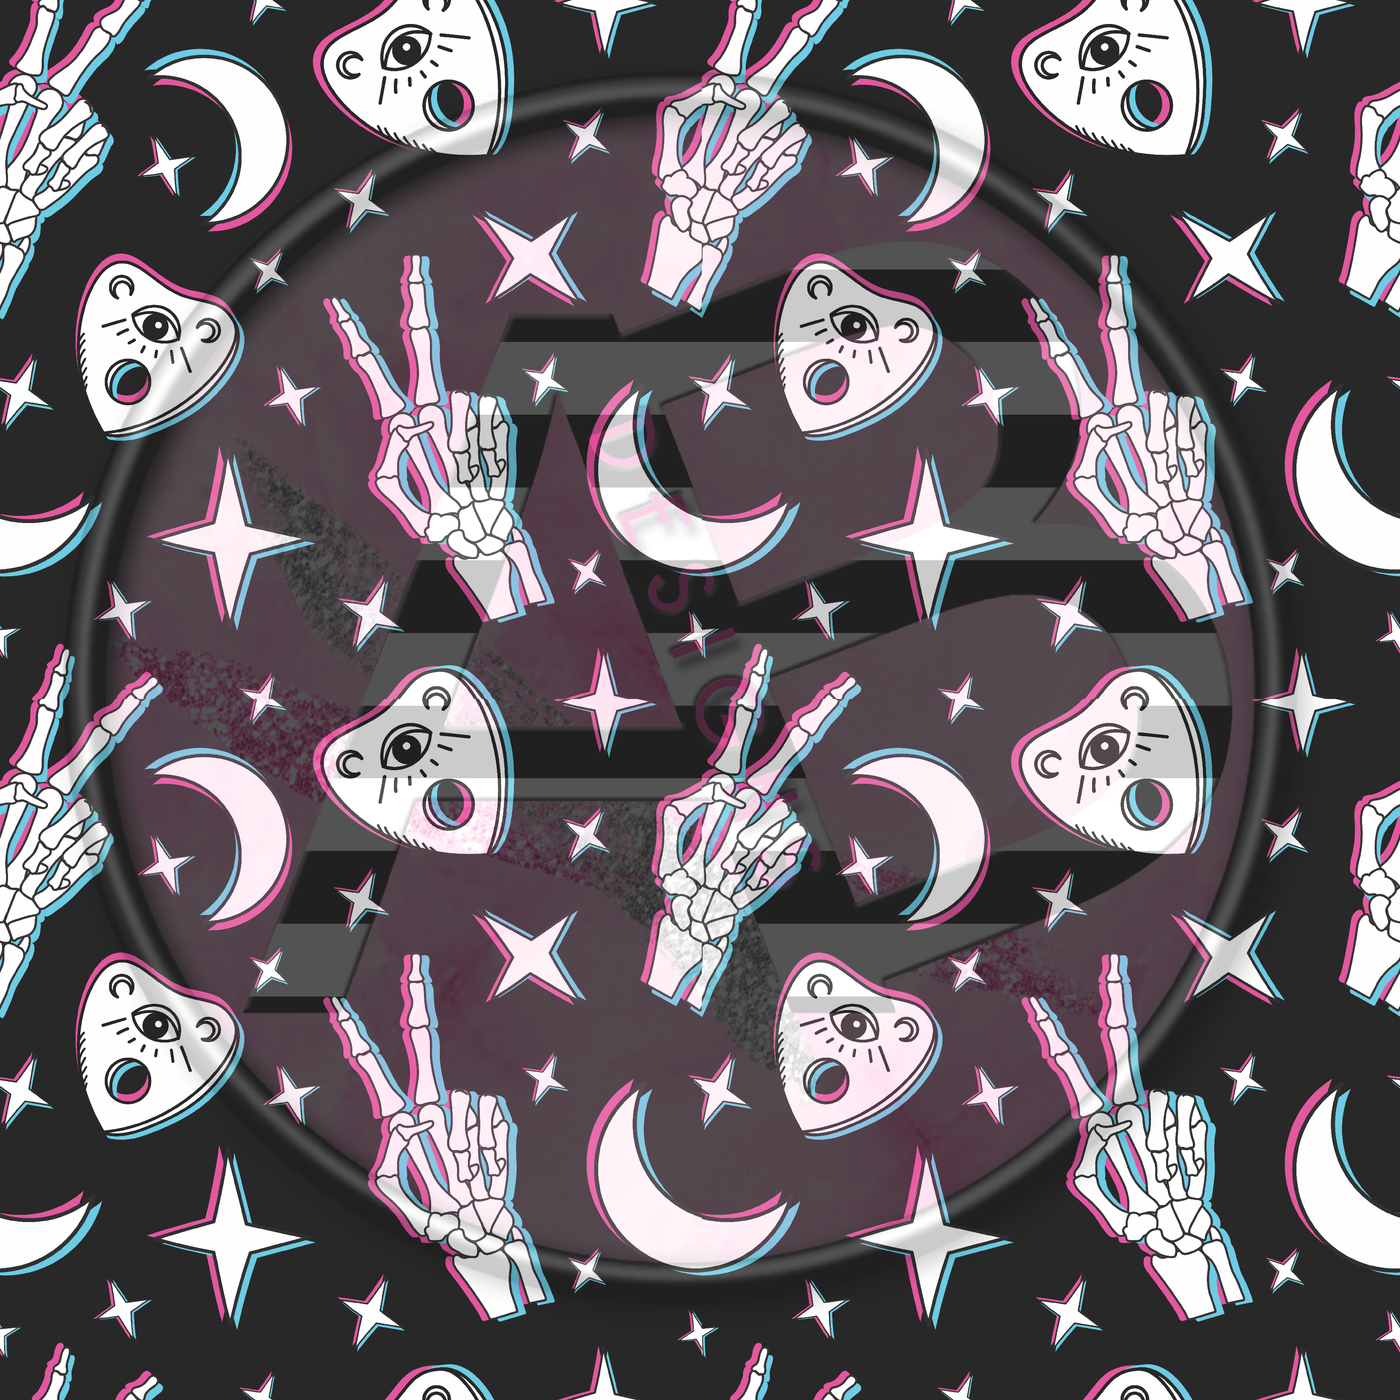 Adhesive Patterned Vinyl - Witchy 111